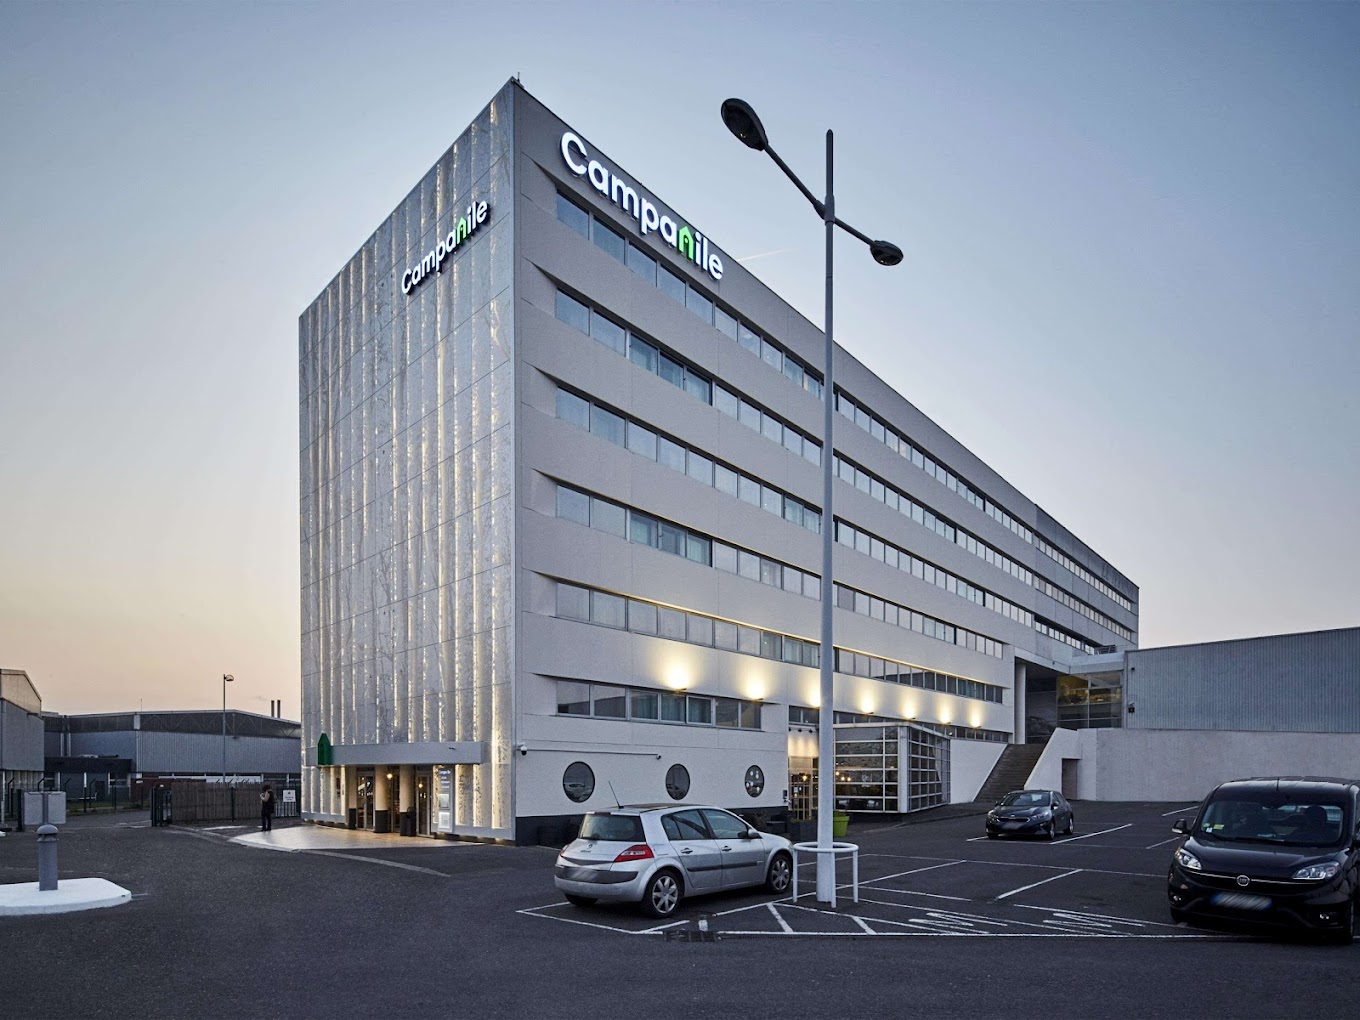 HOTEL CAMPANILE LE BOURGET AIRPORT